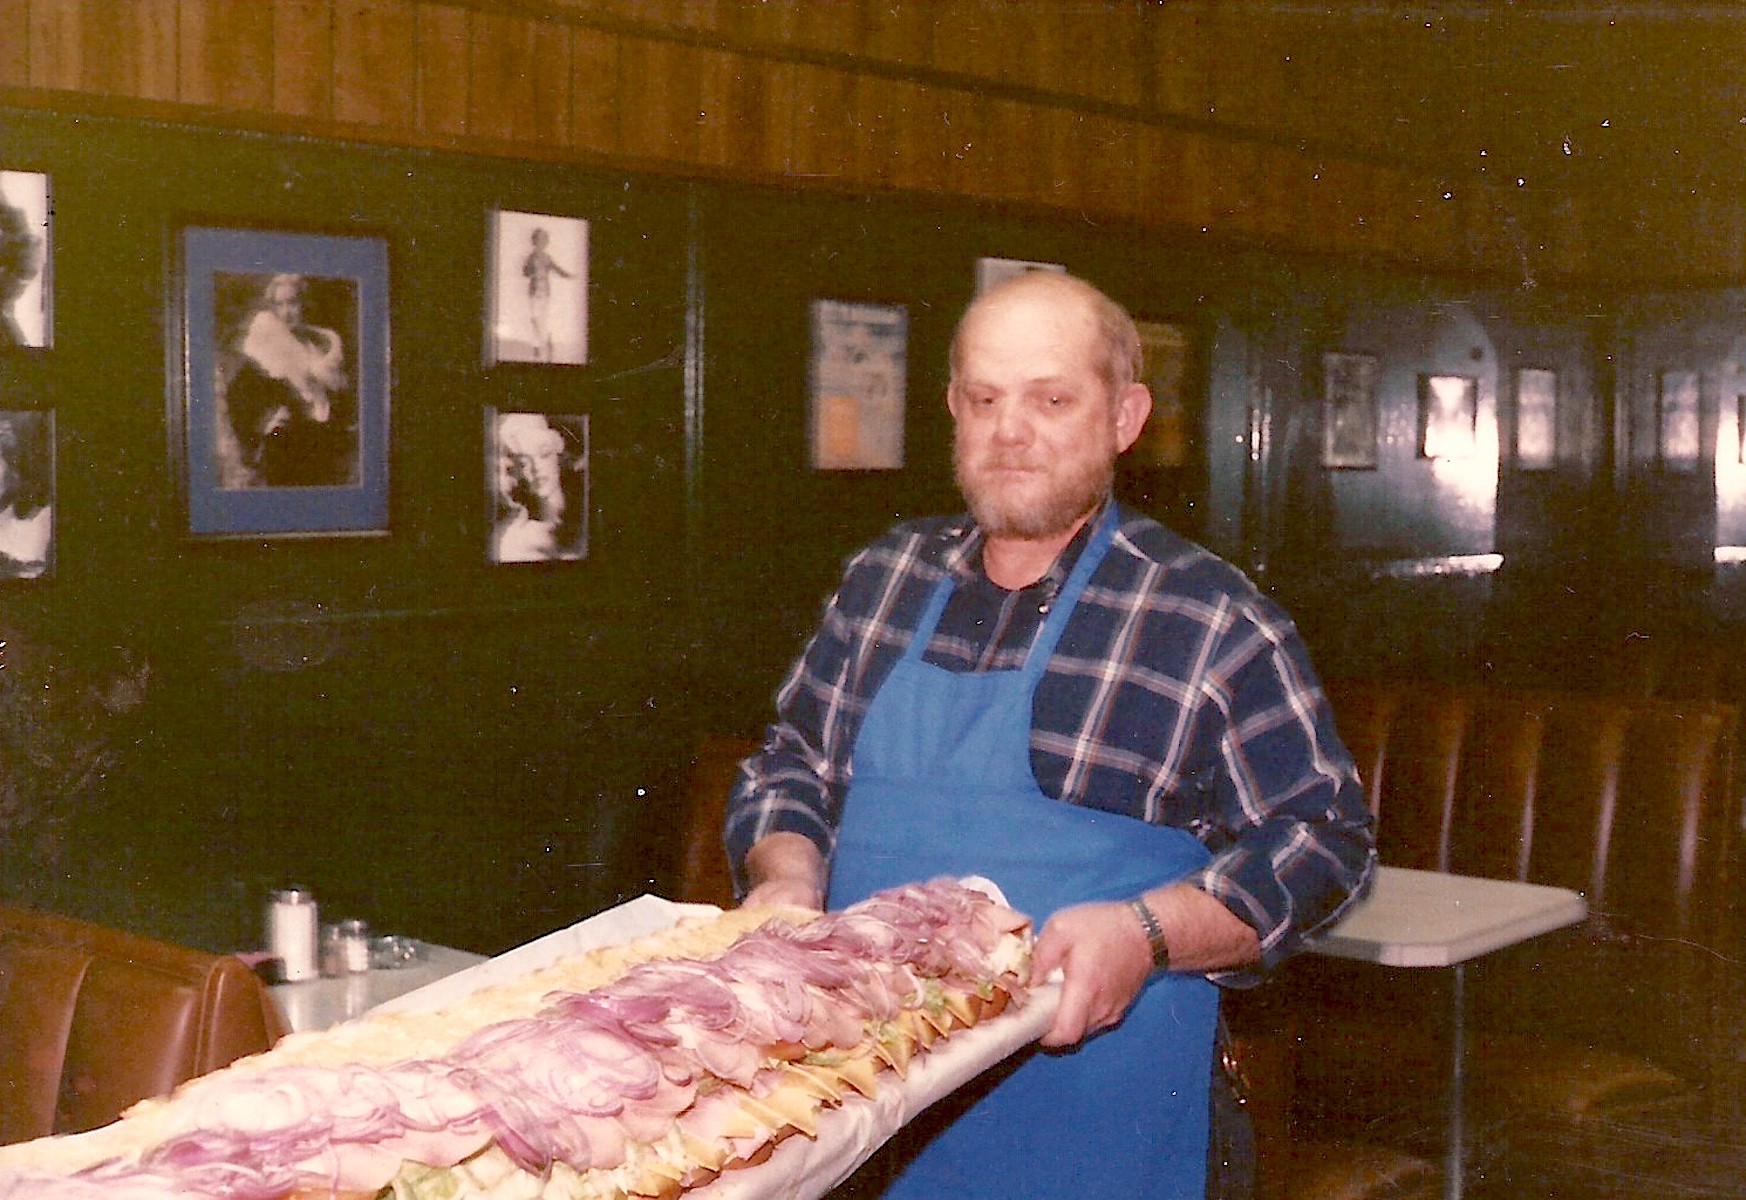 Jack at Peoples Café, holding one of their famous six feet sub sandwiches. Photo courtesy of Jack Myers.